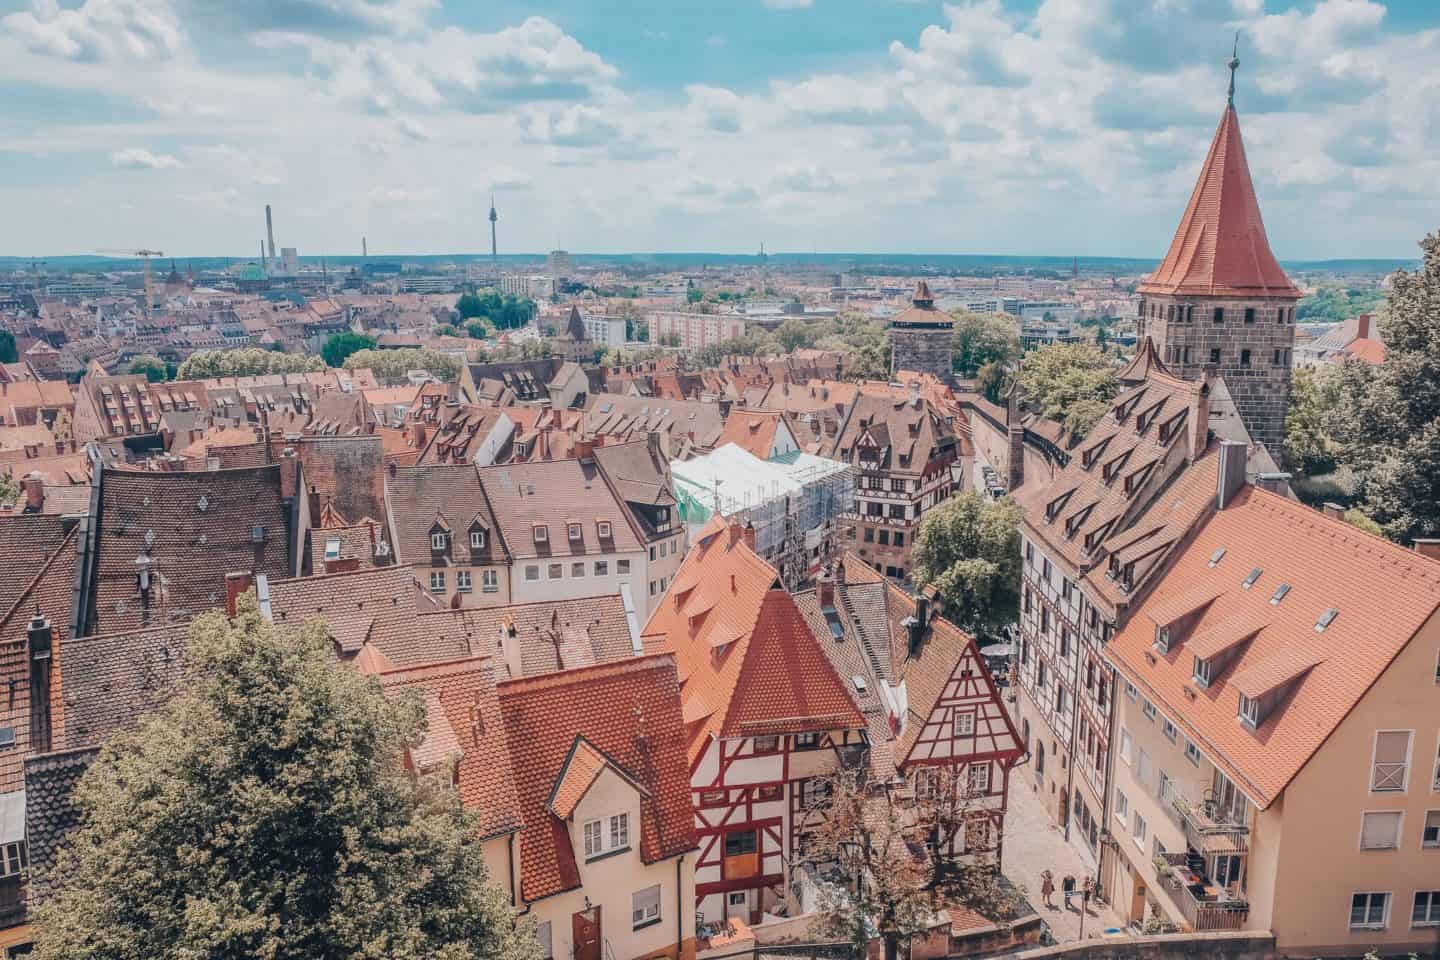 Aerial view of Nuremberg's historic architecture with terra cotta roofs and medieval towers, a perfect starting point for cultural day trips from Nuremberg